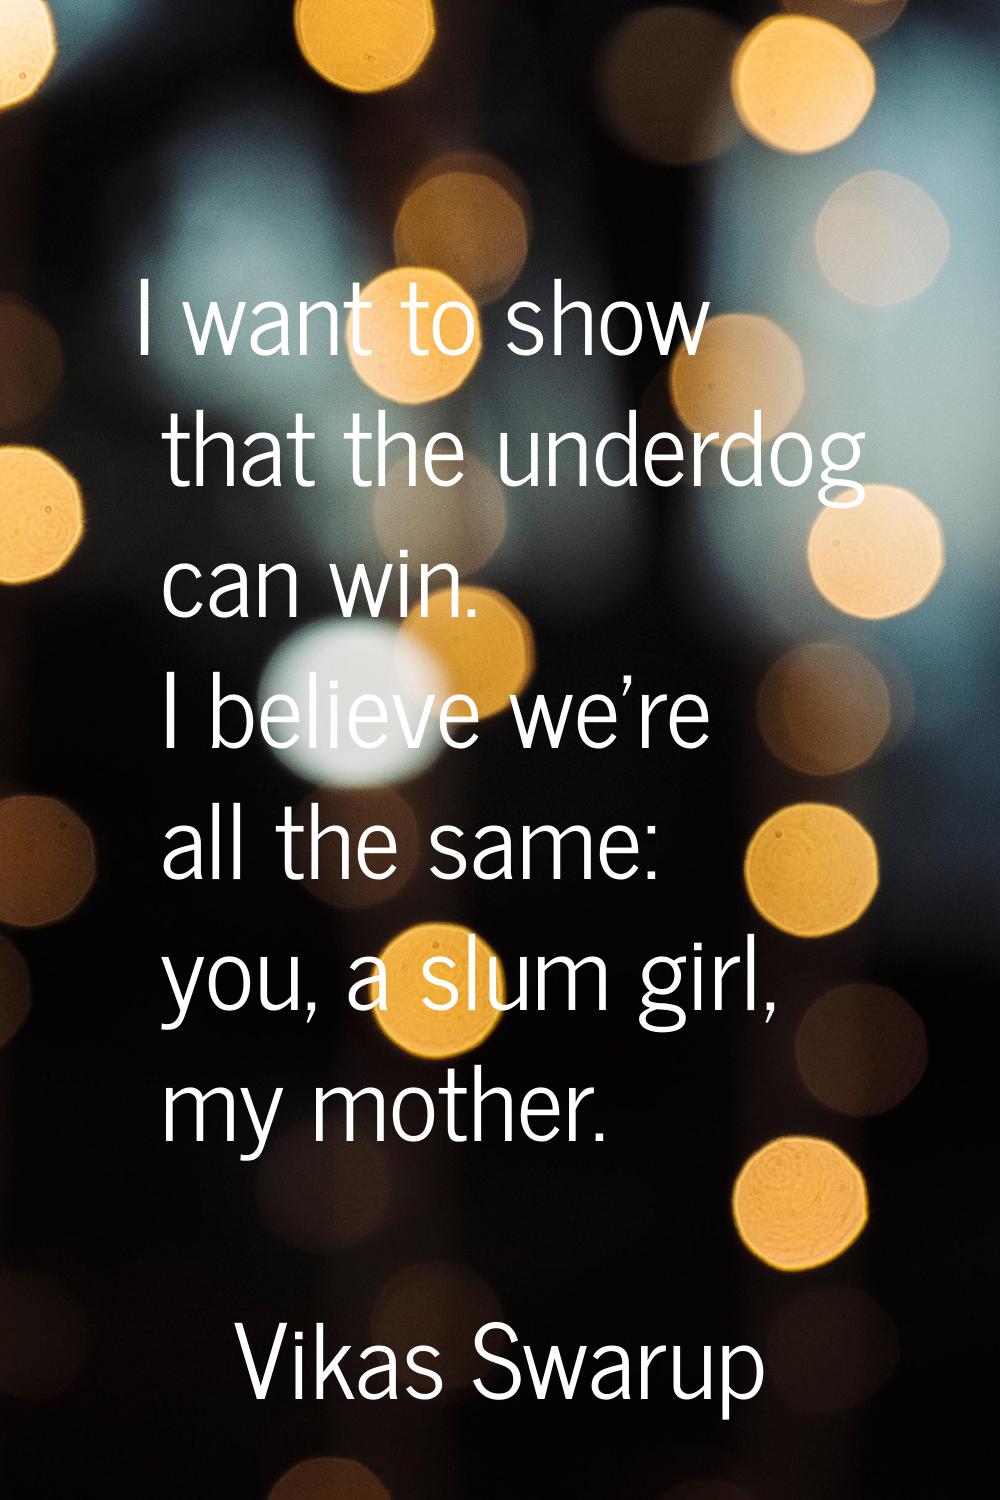 I want to show that the underdog can win. I believe we're all the same: you, a slum girl, my mother